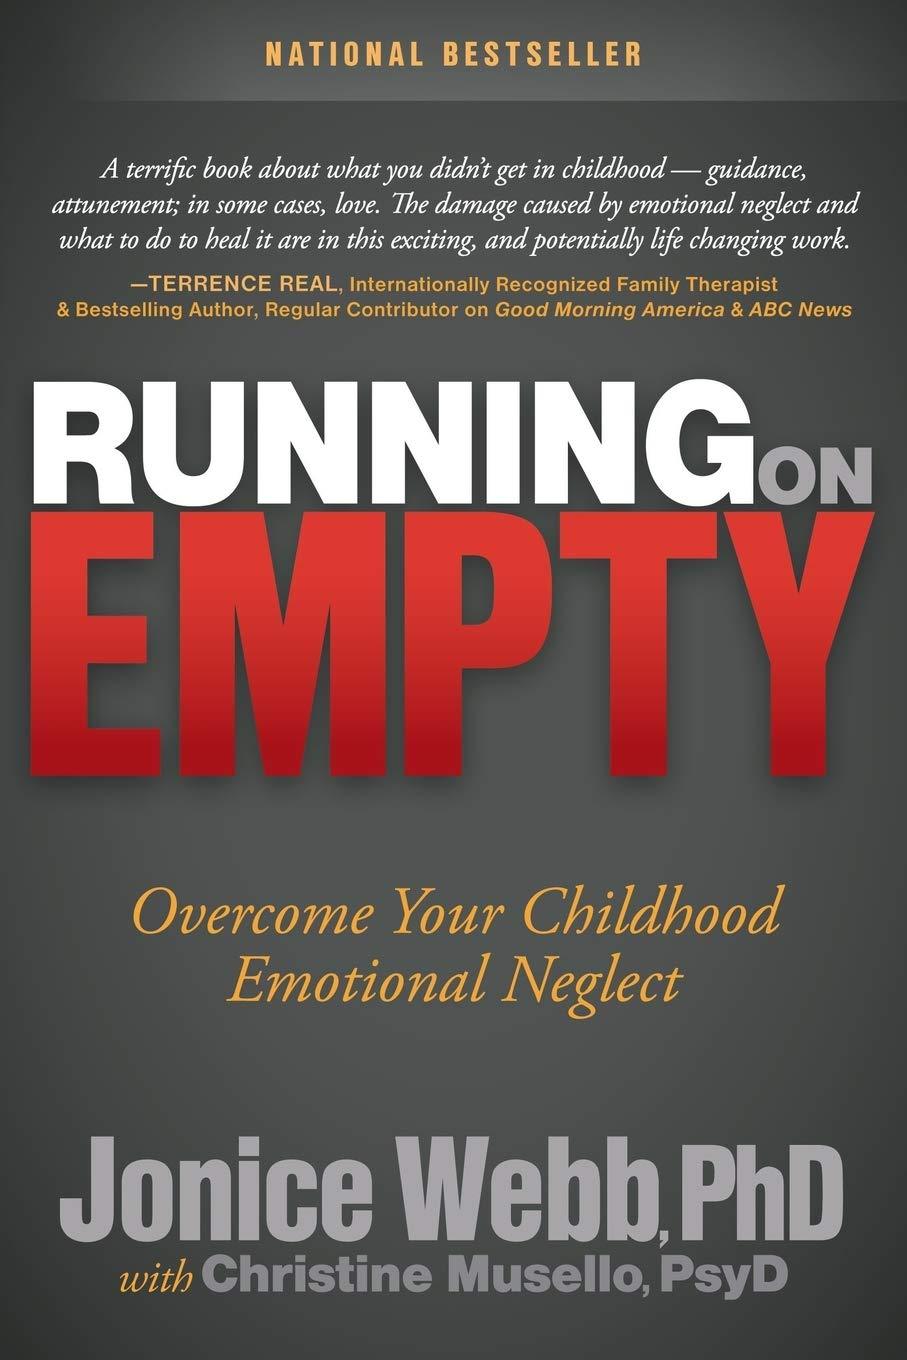 Running on Empty: Overcome Your Childhood Emotional Neglect by Jonice Webb - LV'S Global Media